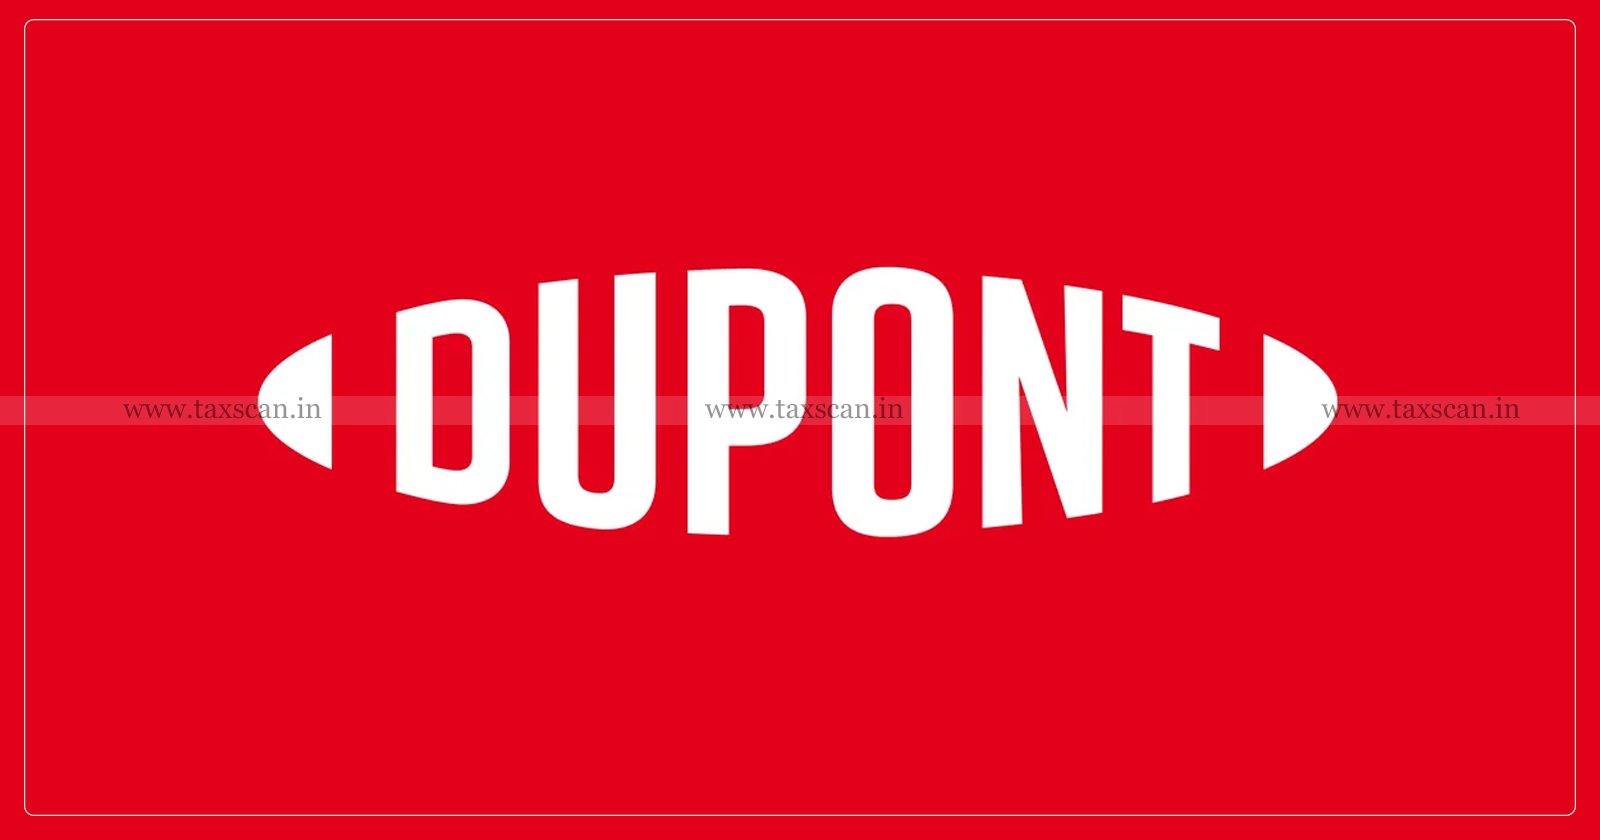 Cost Accountant vacancy in DuPont - Cost Accountant - Cost Accountant vacancy - vacancy in DuPont - DuPont - DuPont Vacancies - DuPont Jobs - Job Vacancy - Cost Accountant vacancies - Job Scan - Taxscan